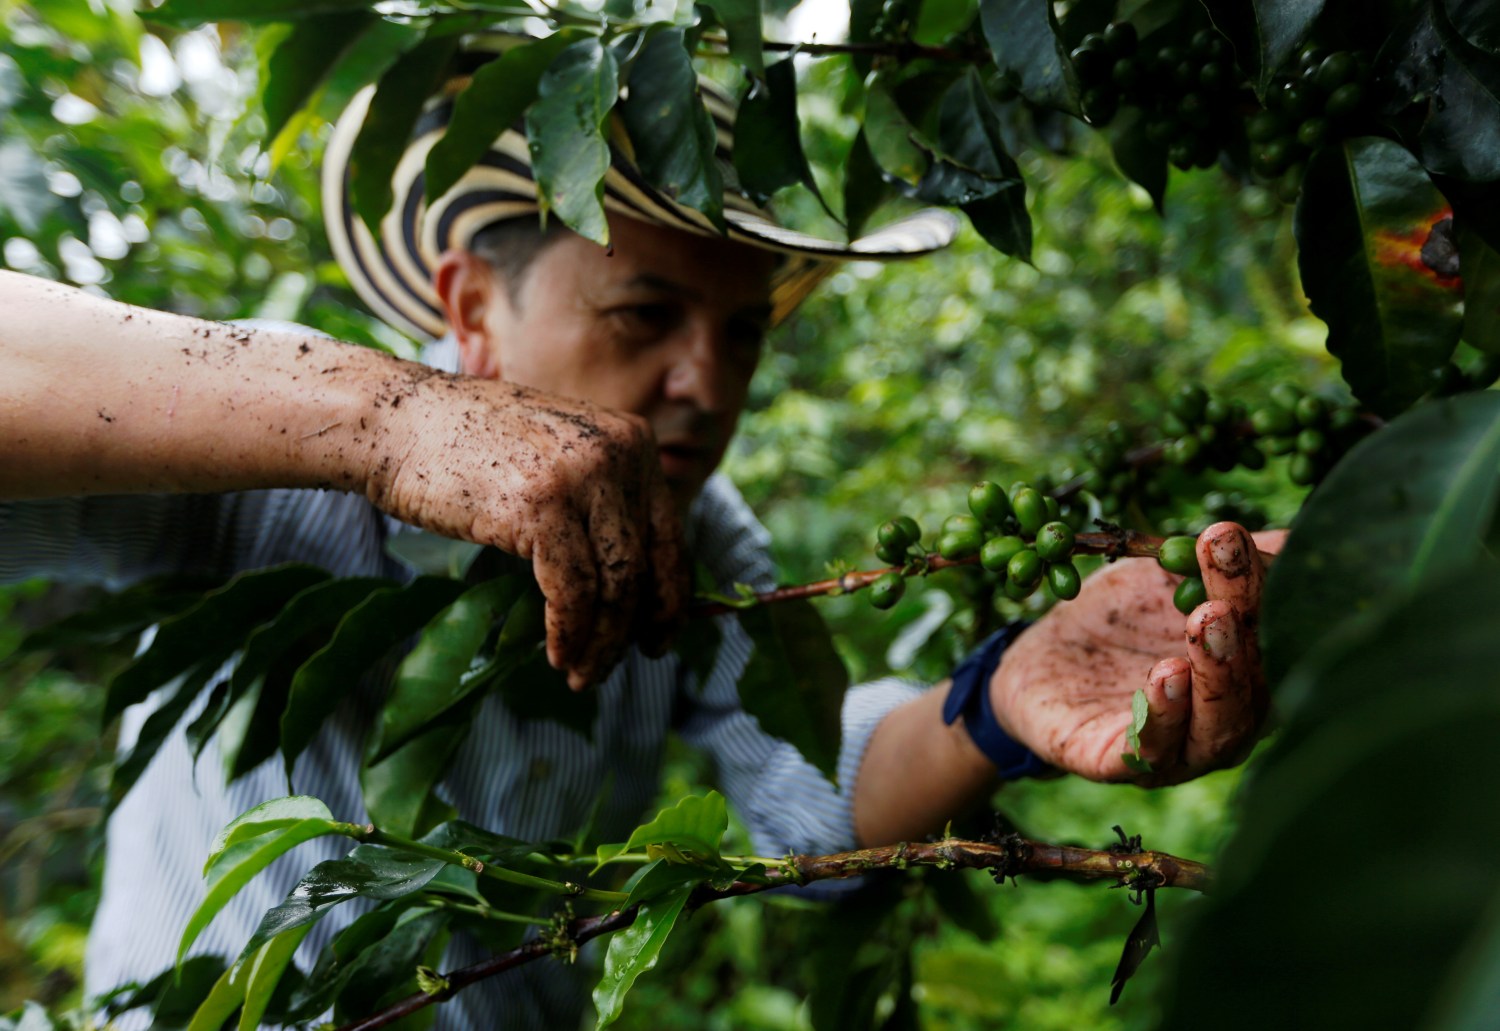 Colombian coffee grower Jose Eliecer Sierra picks coffee fruits at a plantation in Pueblorrico, Colombia March 11, 2019. Picture taken March 11, 2019. REUTERS/Luisa Gonzalez - RC14ED1E2770